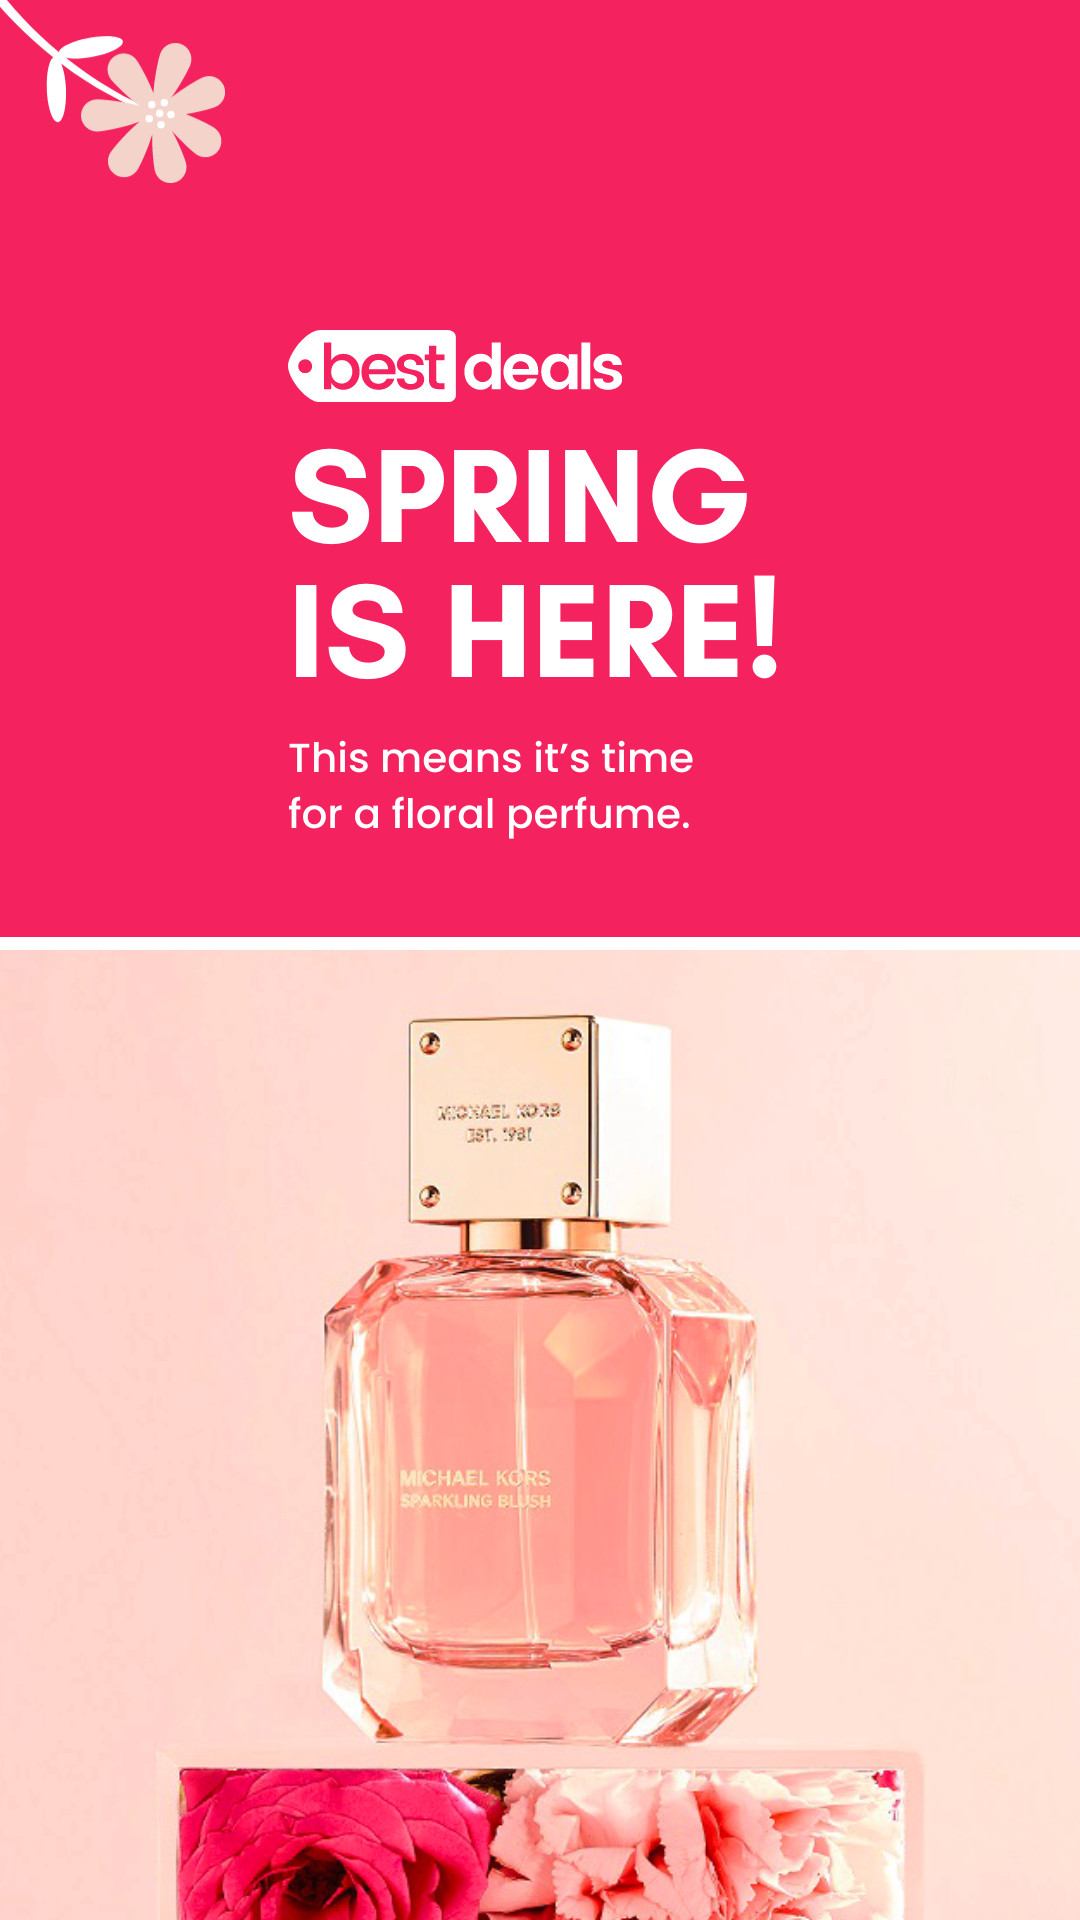 Spring Floral Perfume Time Inline Rectangle 300x250